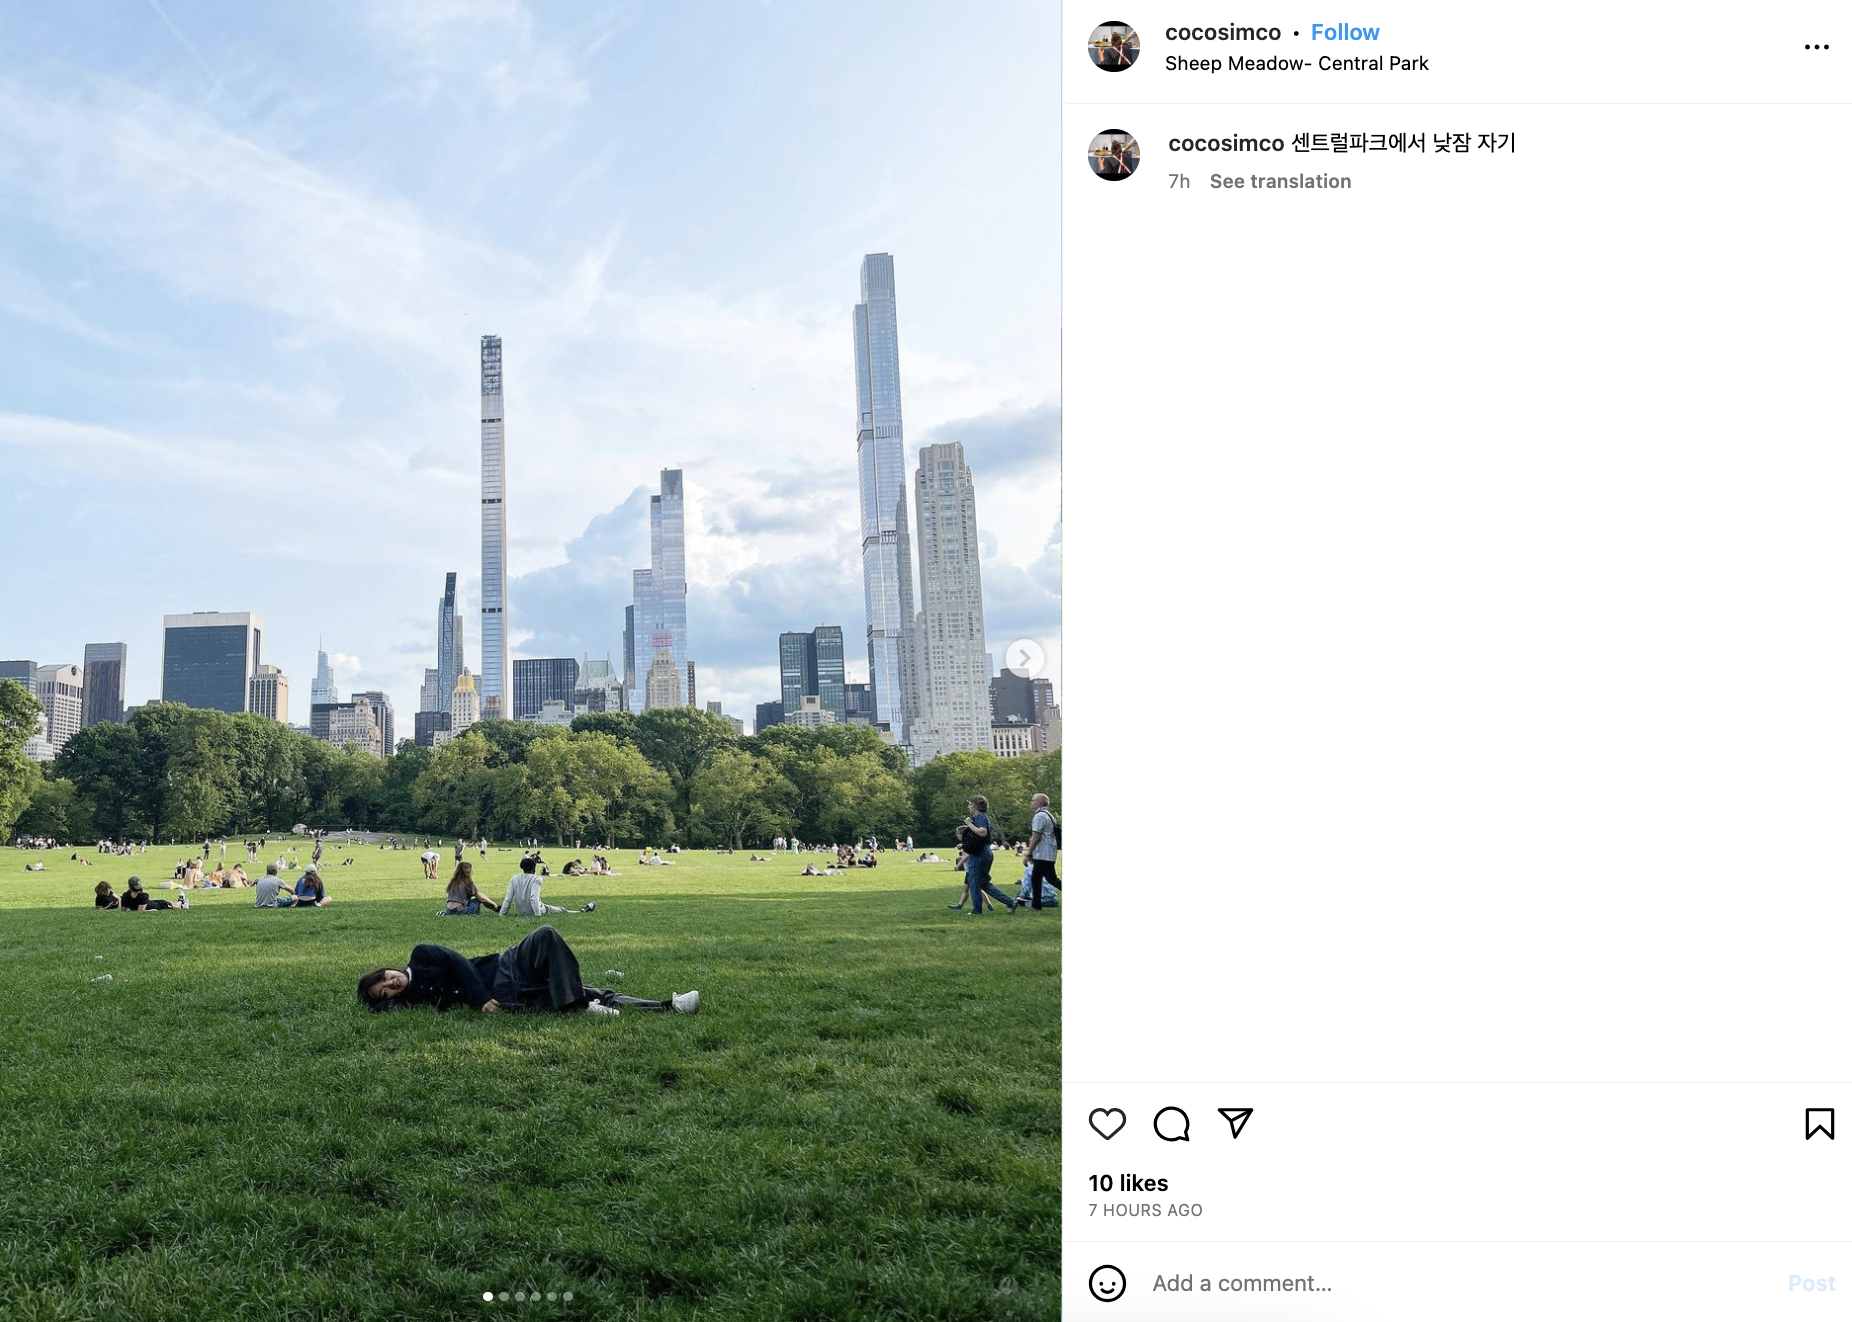 Sheep Meadow by @cocosimco